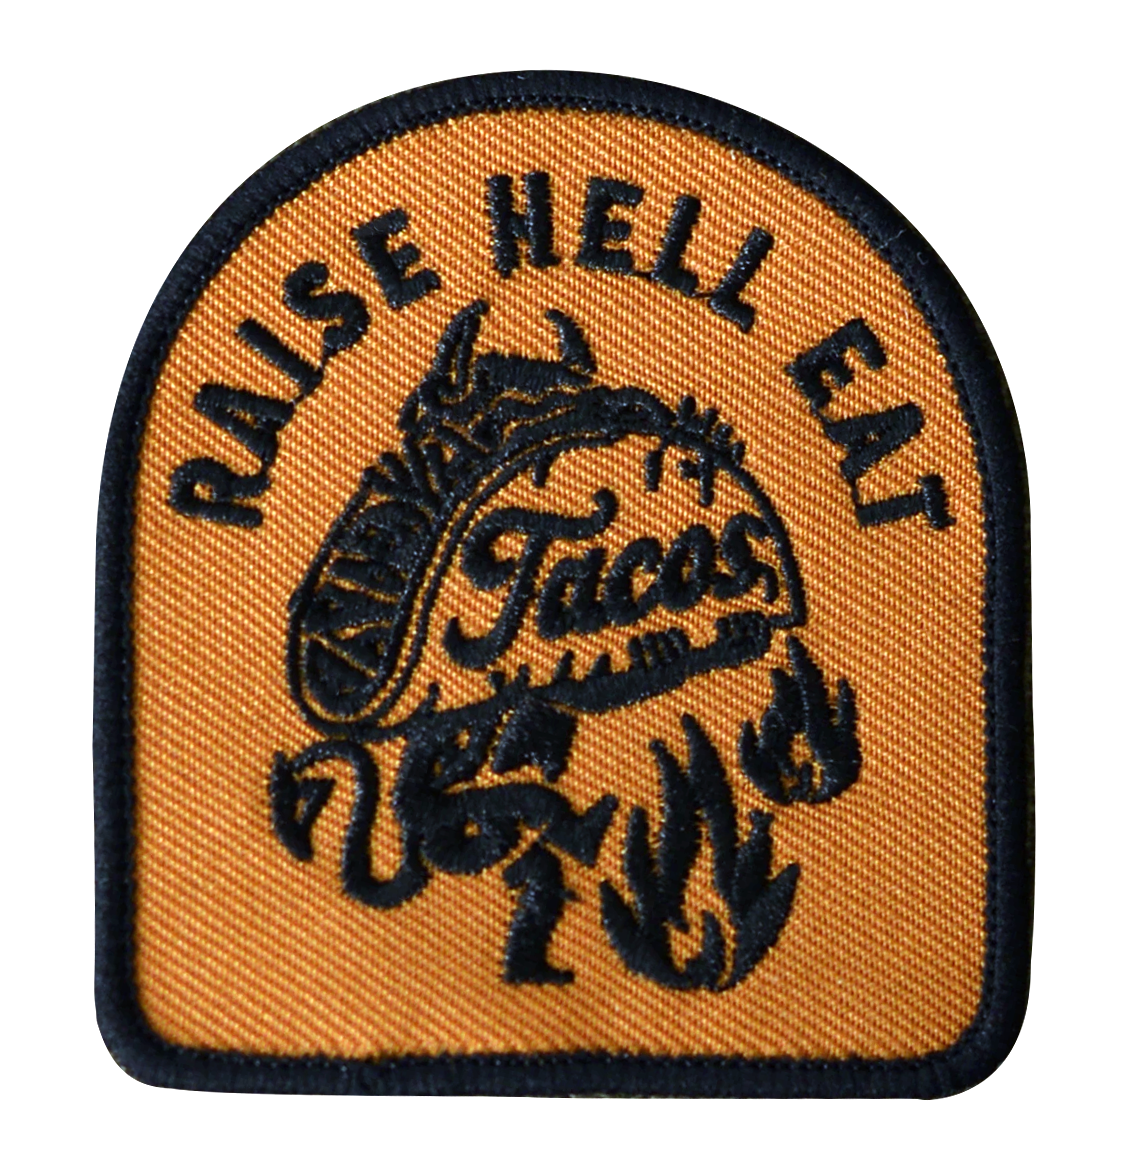 PYKNIC RAISE HELL EAT TACOS PATCH